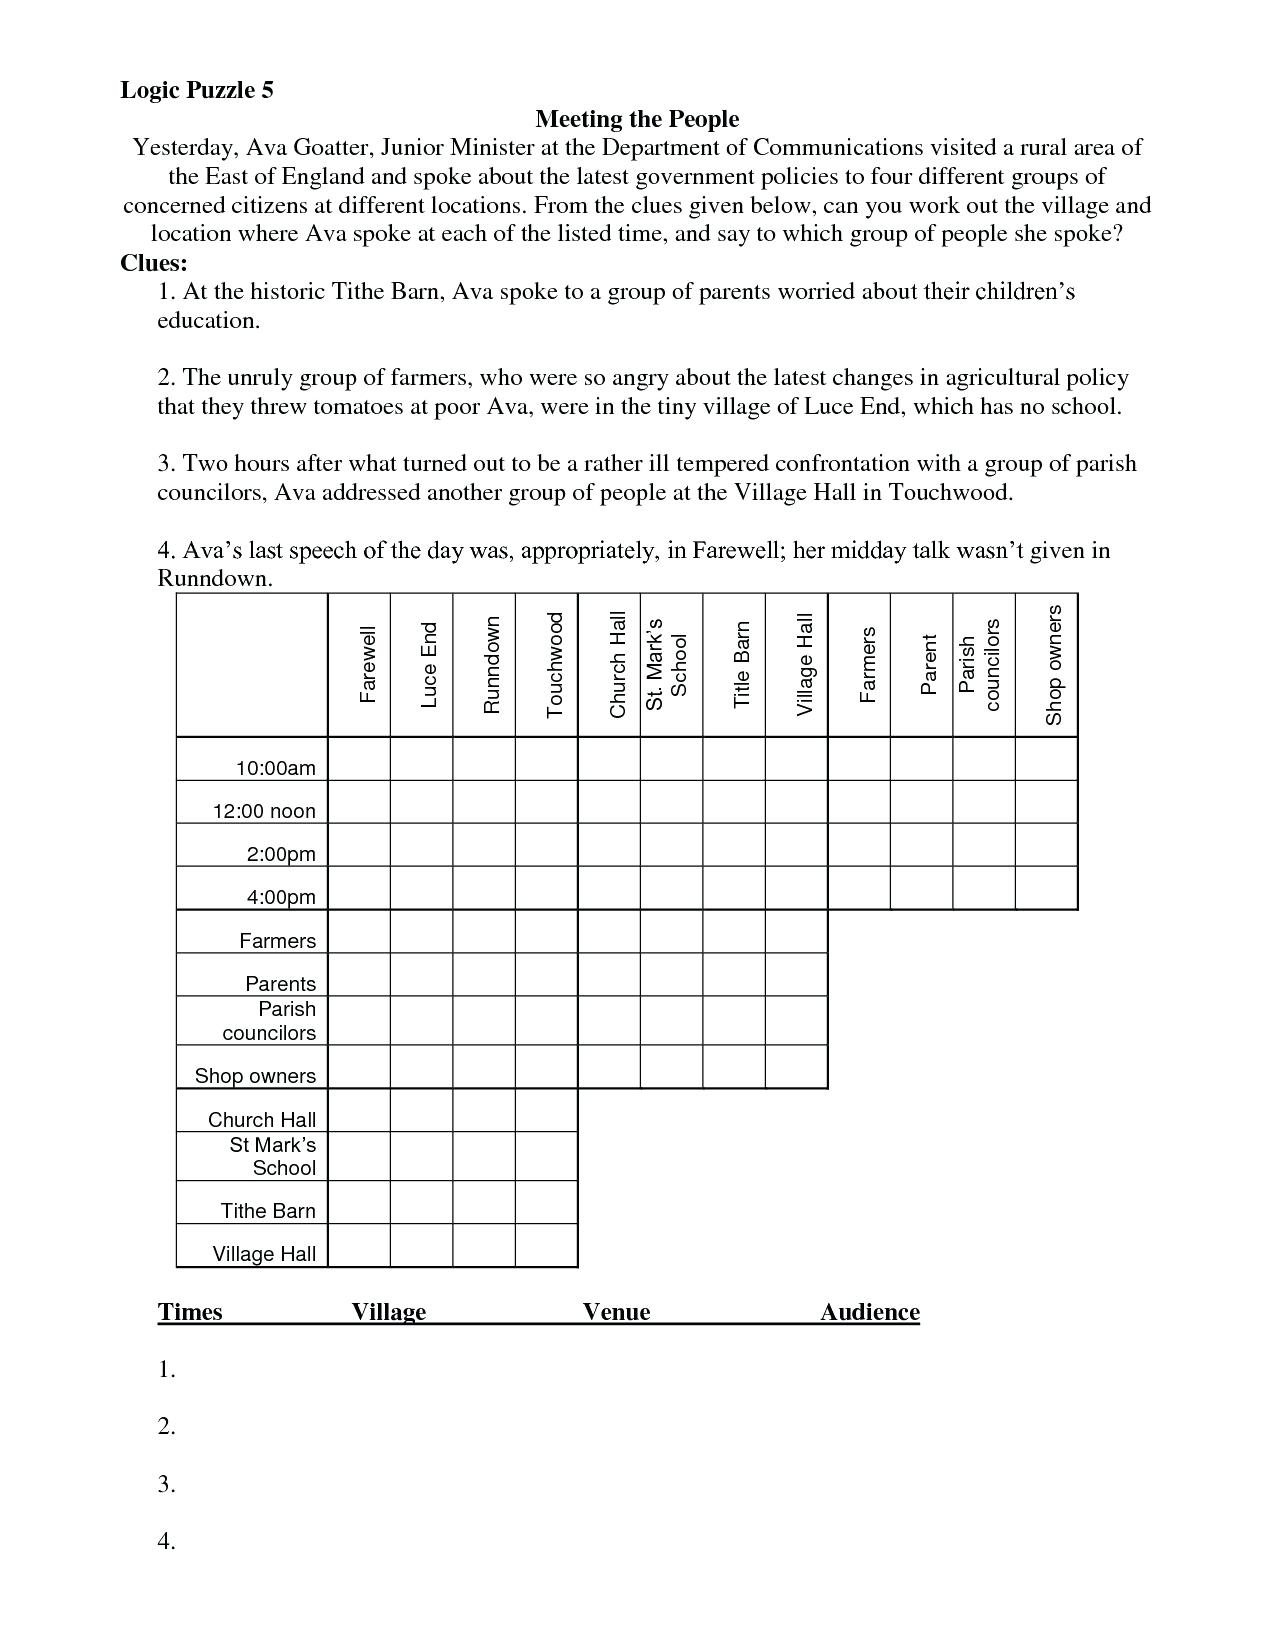 Logic Puzzles For High School It Logic Puzzles For High School - Free Printable Logic Puzzles For High School Students